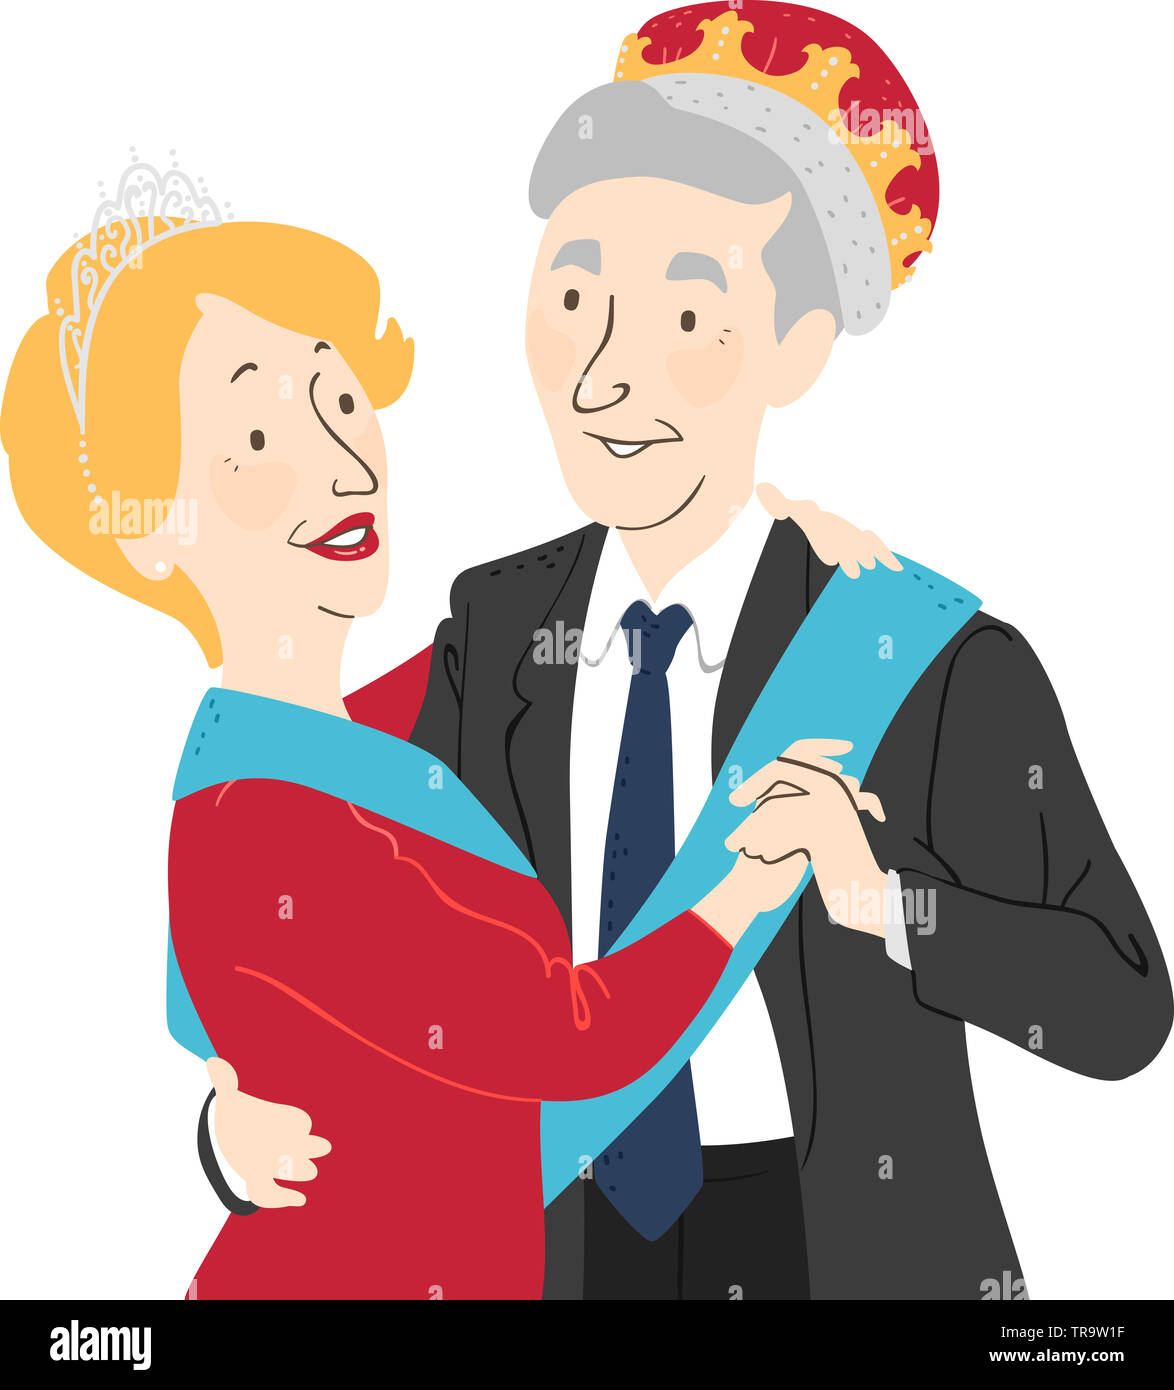 Illustration of a Senior Man and Woman Couple Wearing King and Queen Crown and Dancing Stock Photo